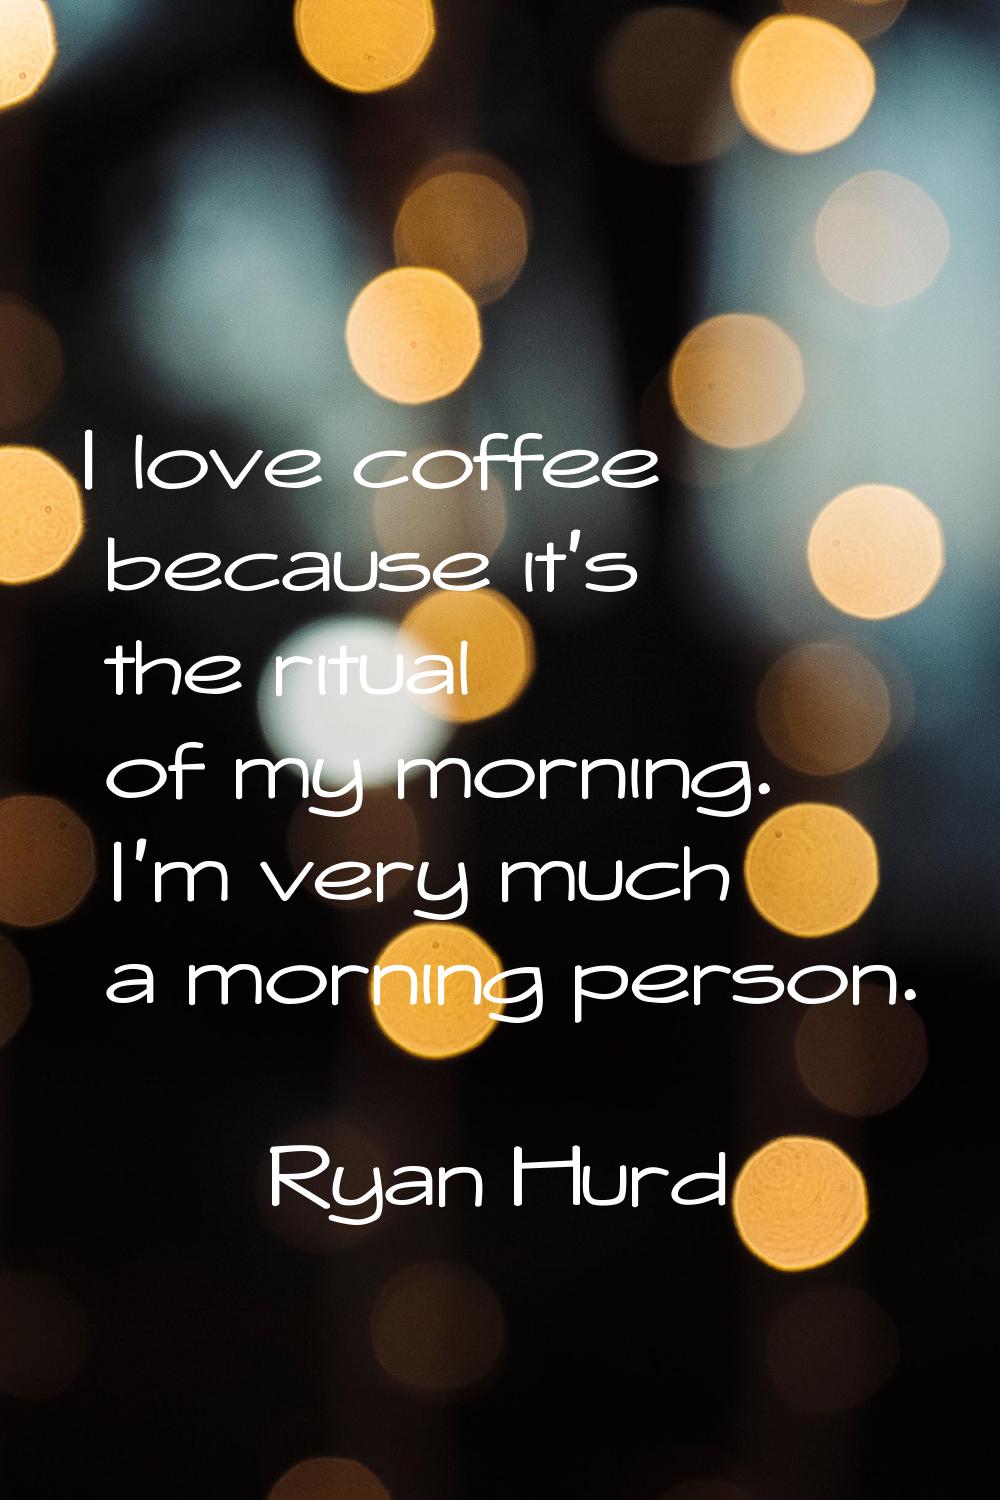 I love coffee because it's the ritual of my morning. I'm very much a morning person.